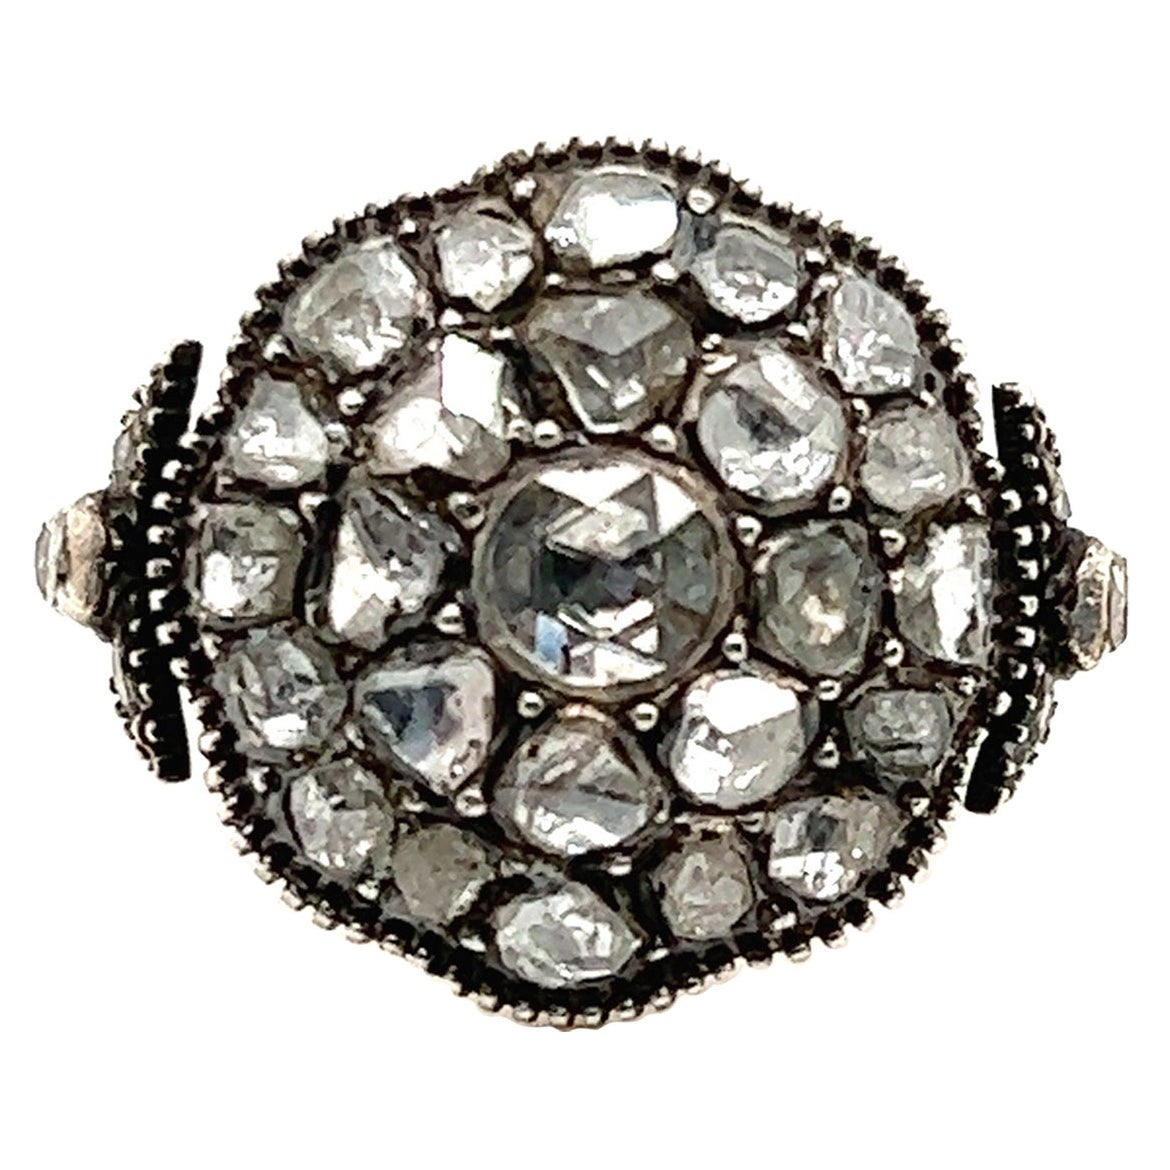 Victorian Era Rose-Cut Diamond Ring in Silver-Topped Gold Mounting